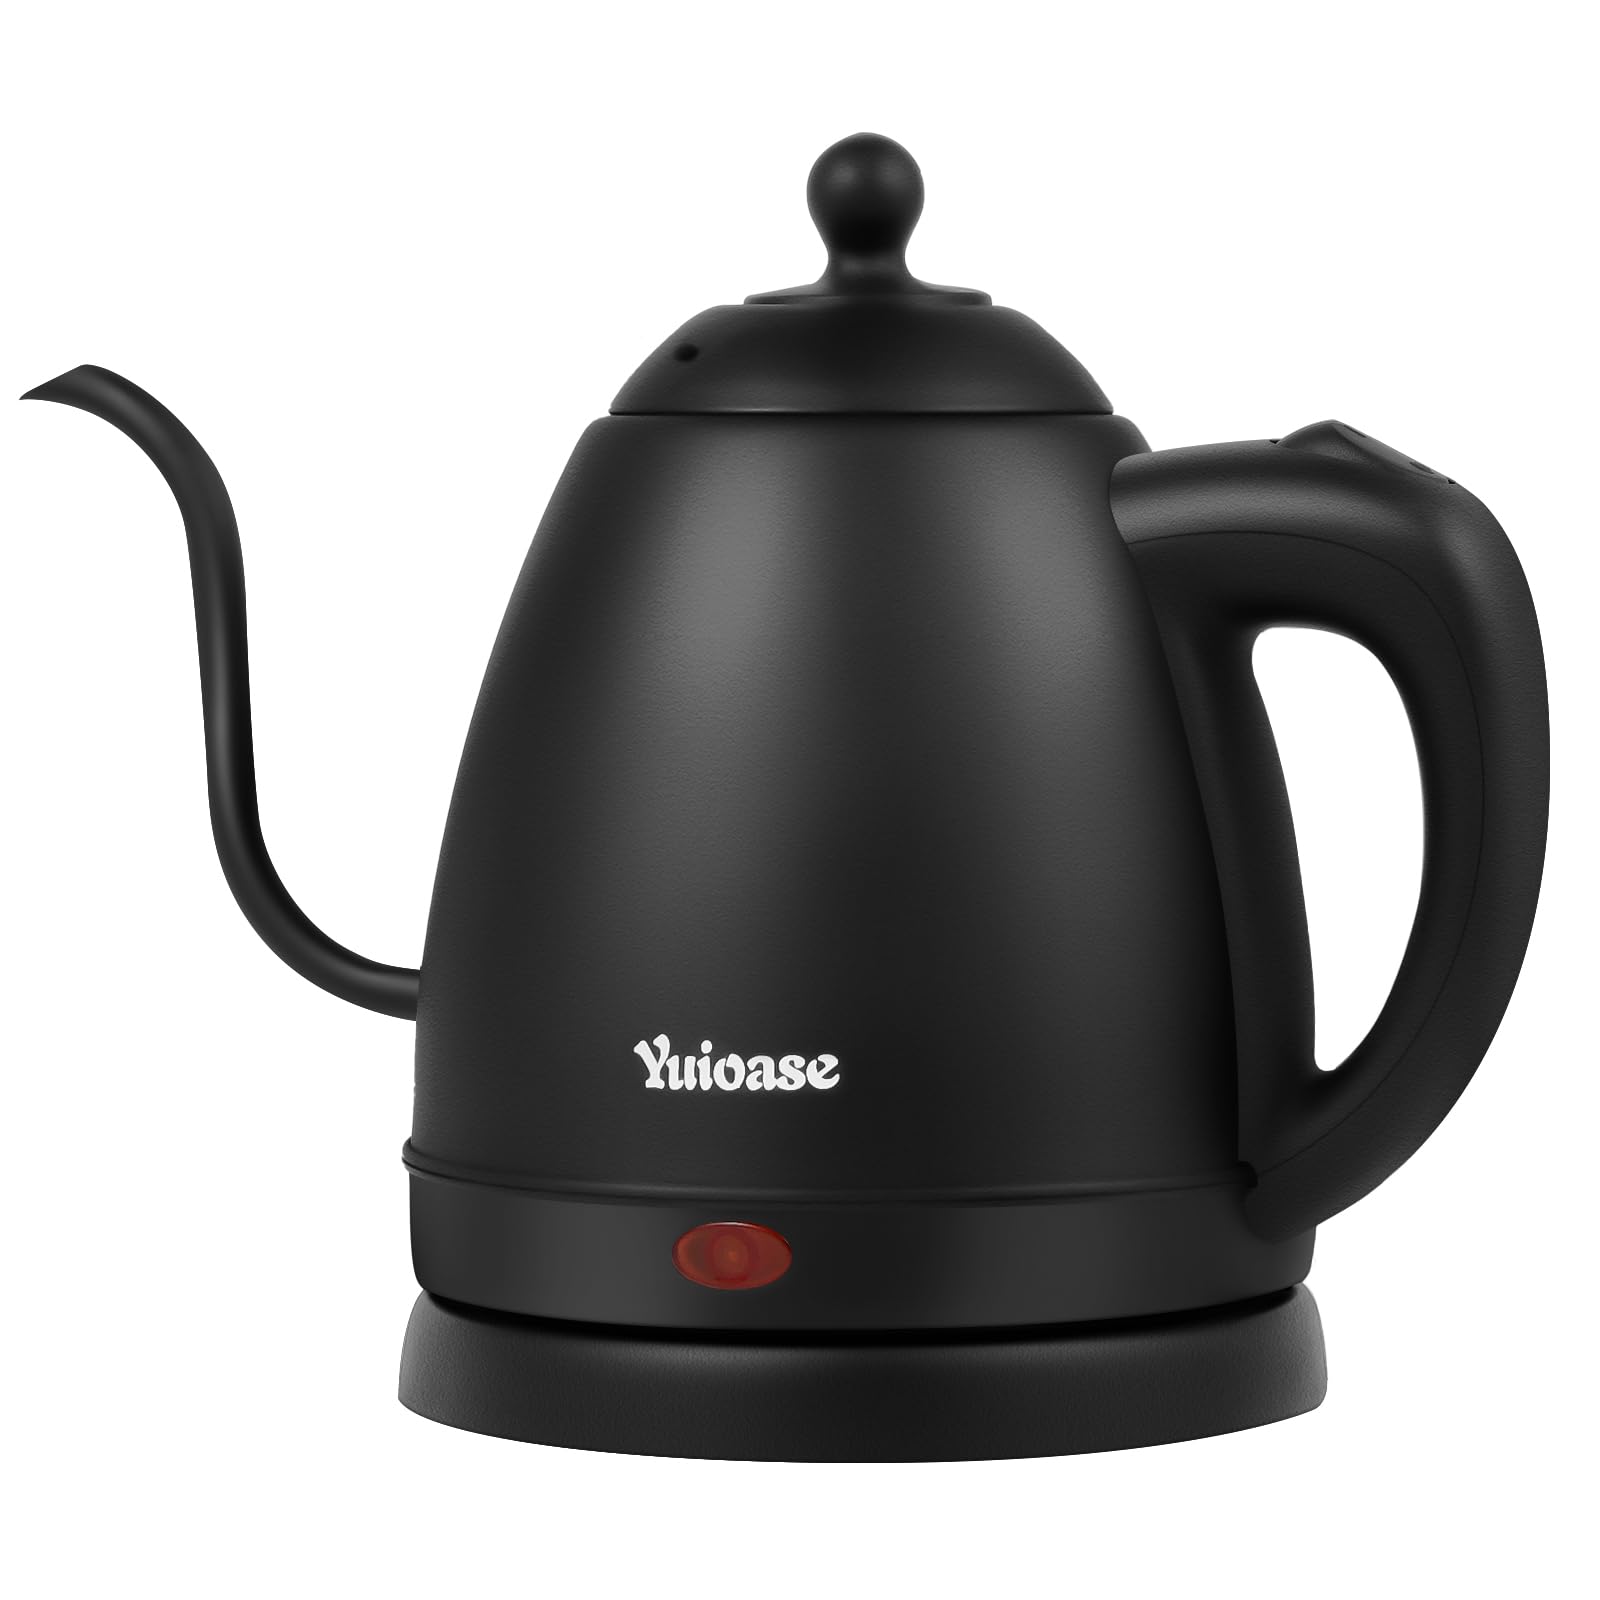 Electric Gooseneck Kettle, Stainless Steel Coffee Kettle, Auto Shutoff, Anti-dry Water Boiler, Pour-over Coffee & Tea,Matte Black 1.0L-1000W Fast Heating Kettle by YUIOASE